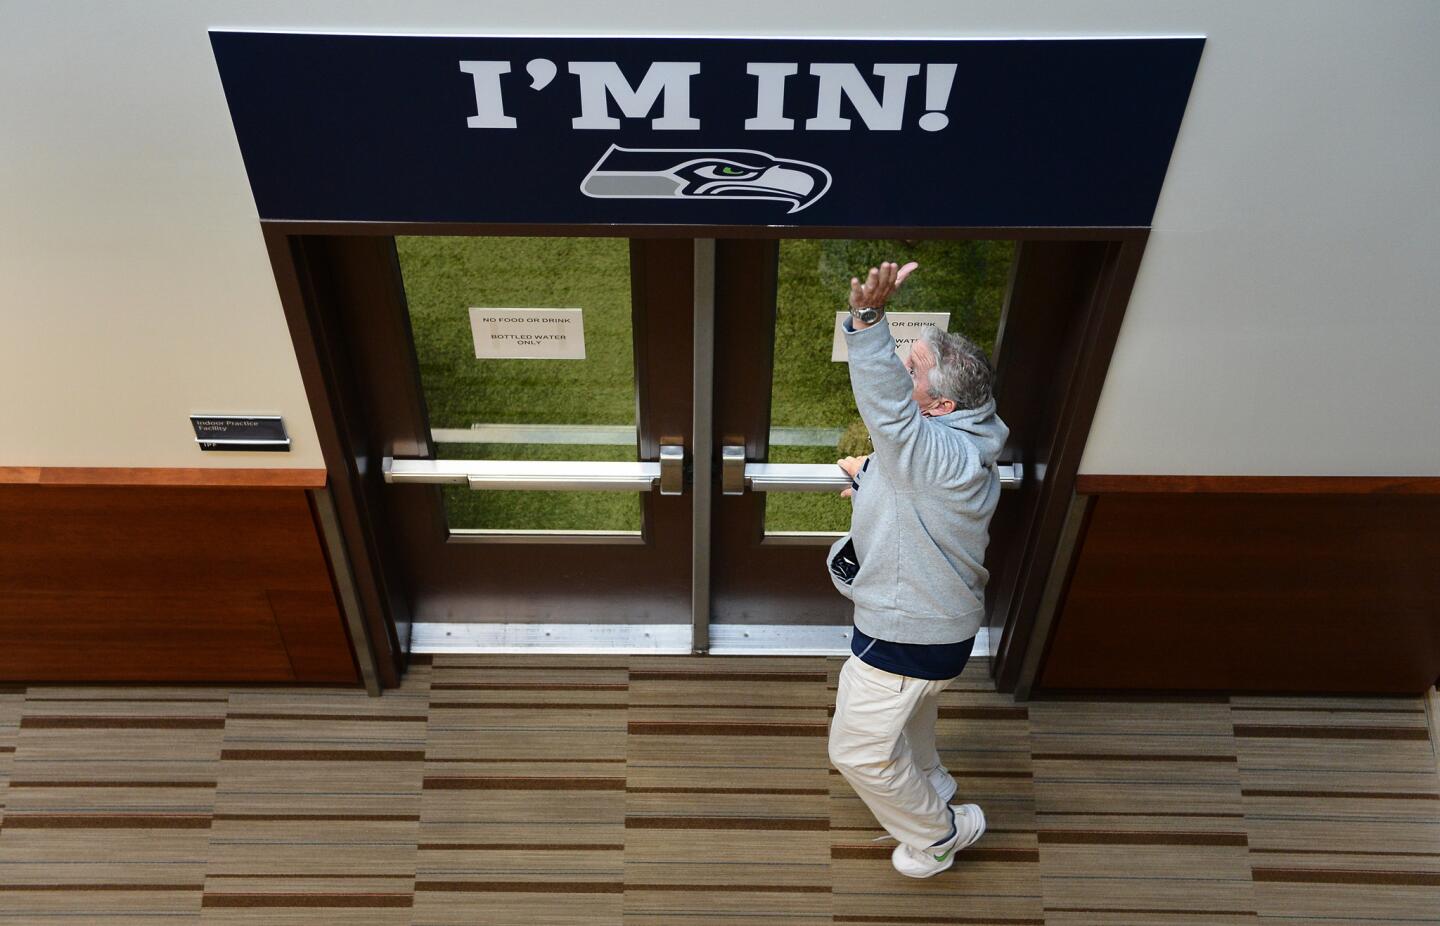 As a ritual Seahawks head coach Pete Carroll jumps to touch the sign before entering the practice facility in Seattle.